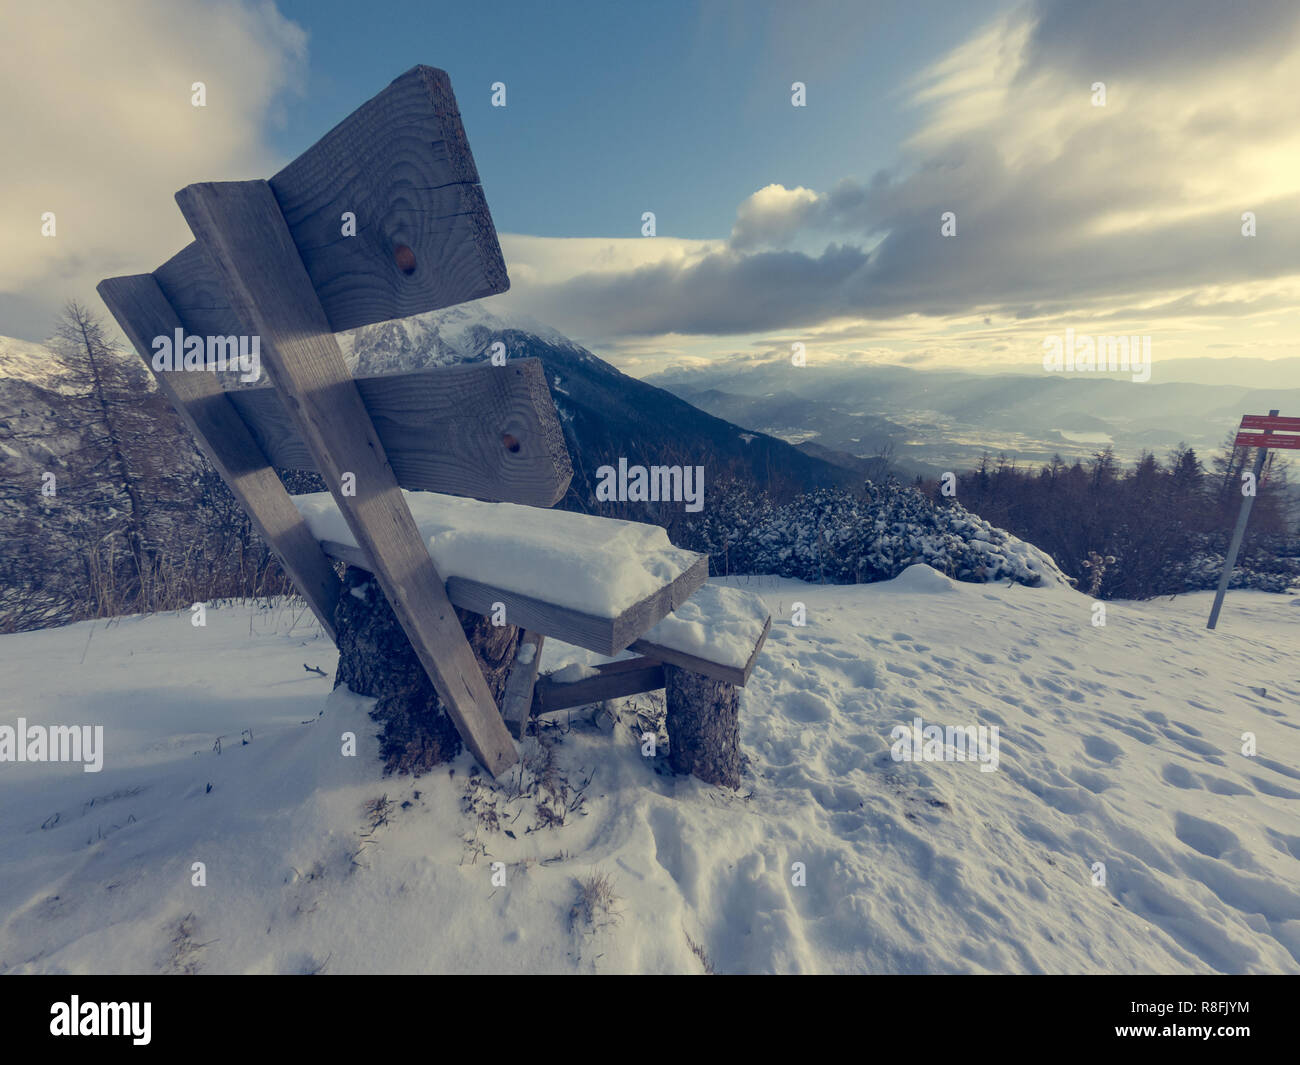 Winter landscape with first snow freshly fallen just covering the scene. Roblek at Begunjscica, Slovenia. Stock Photo